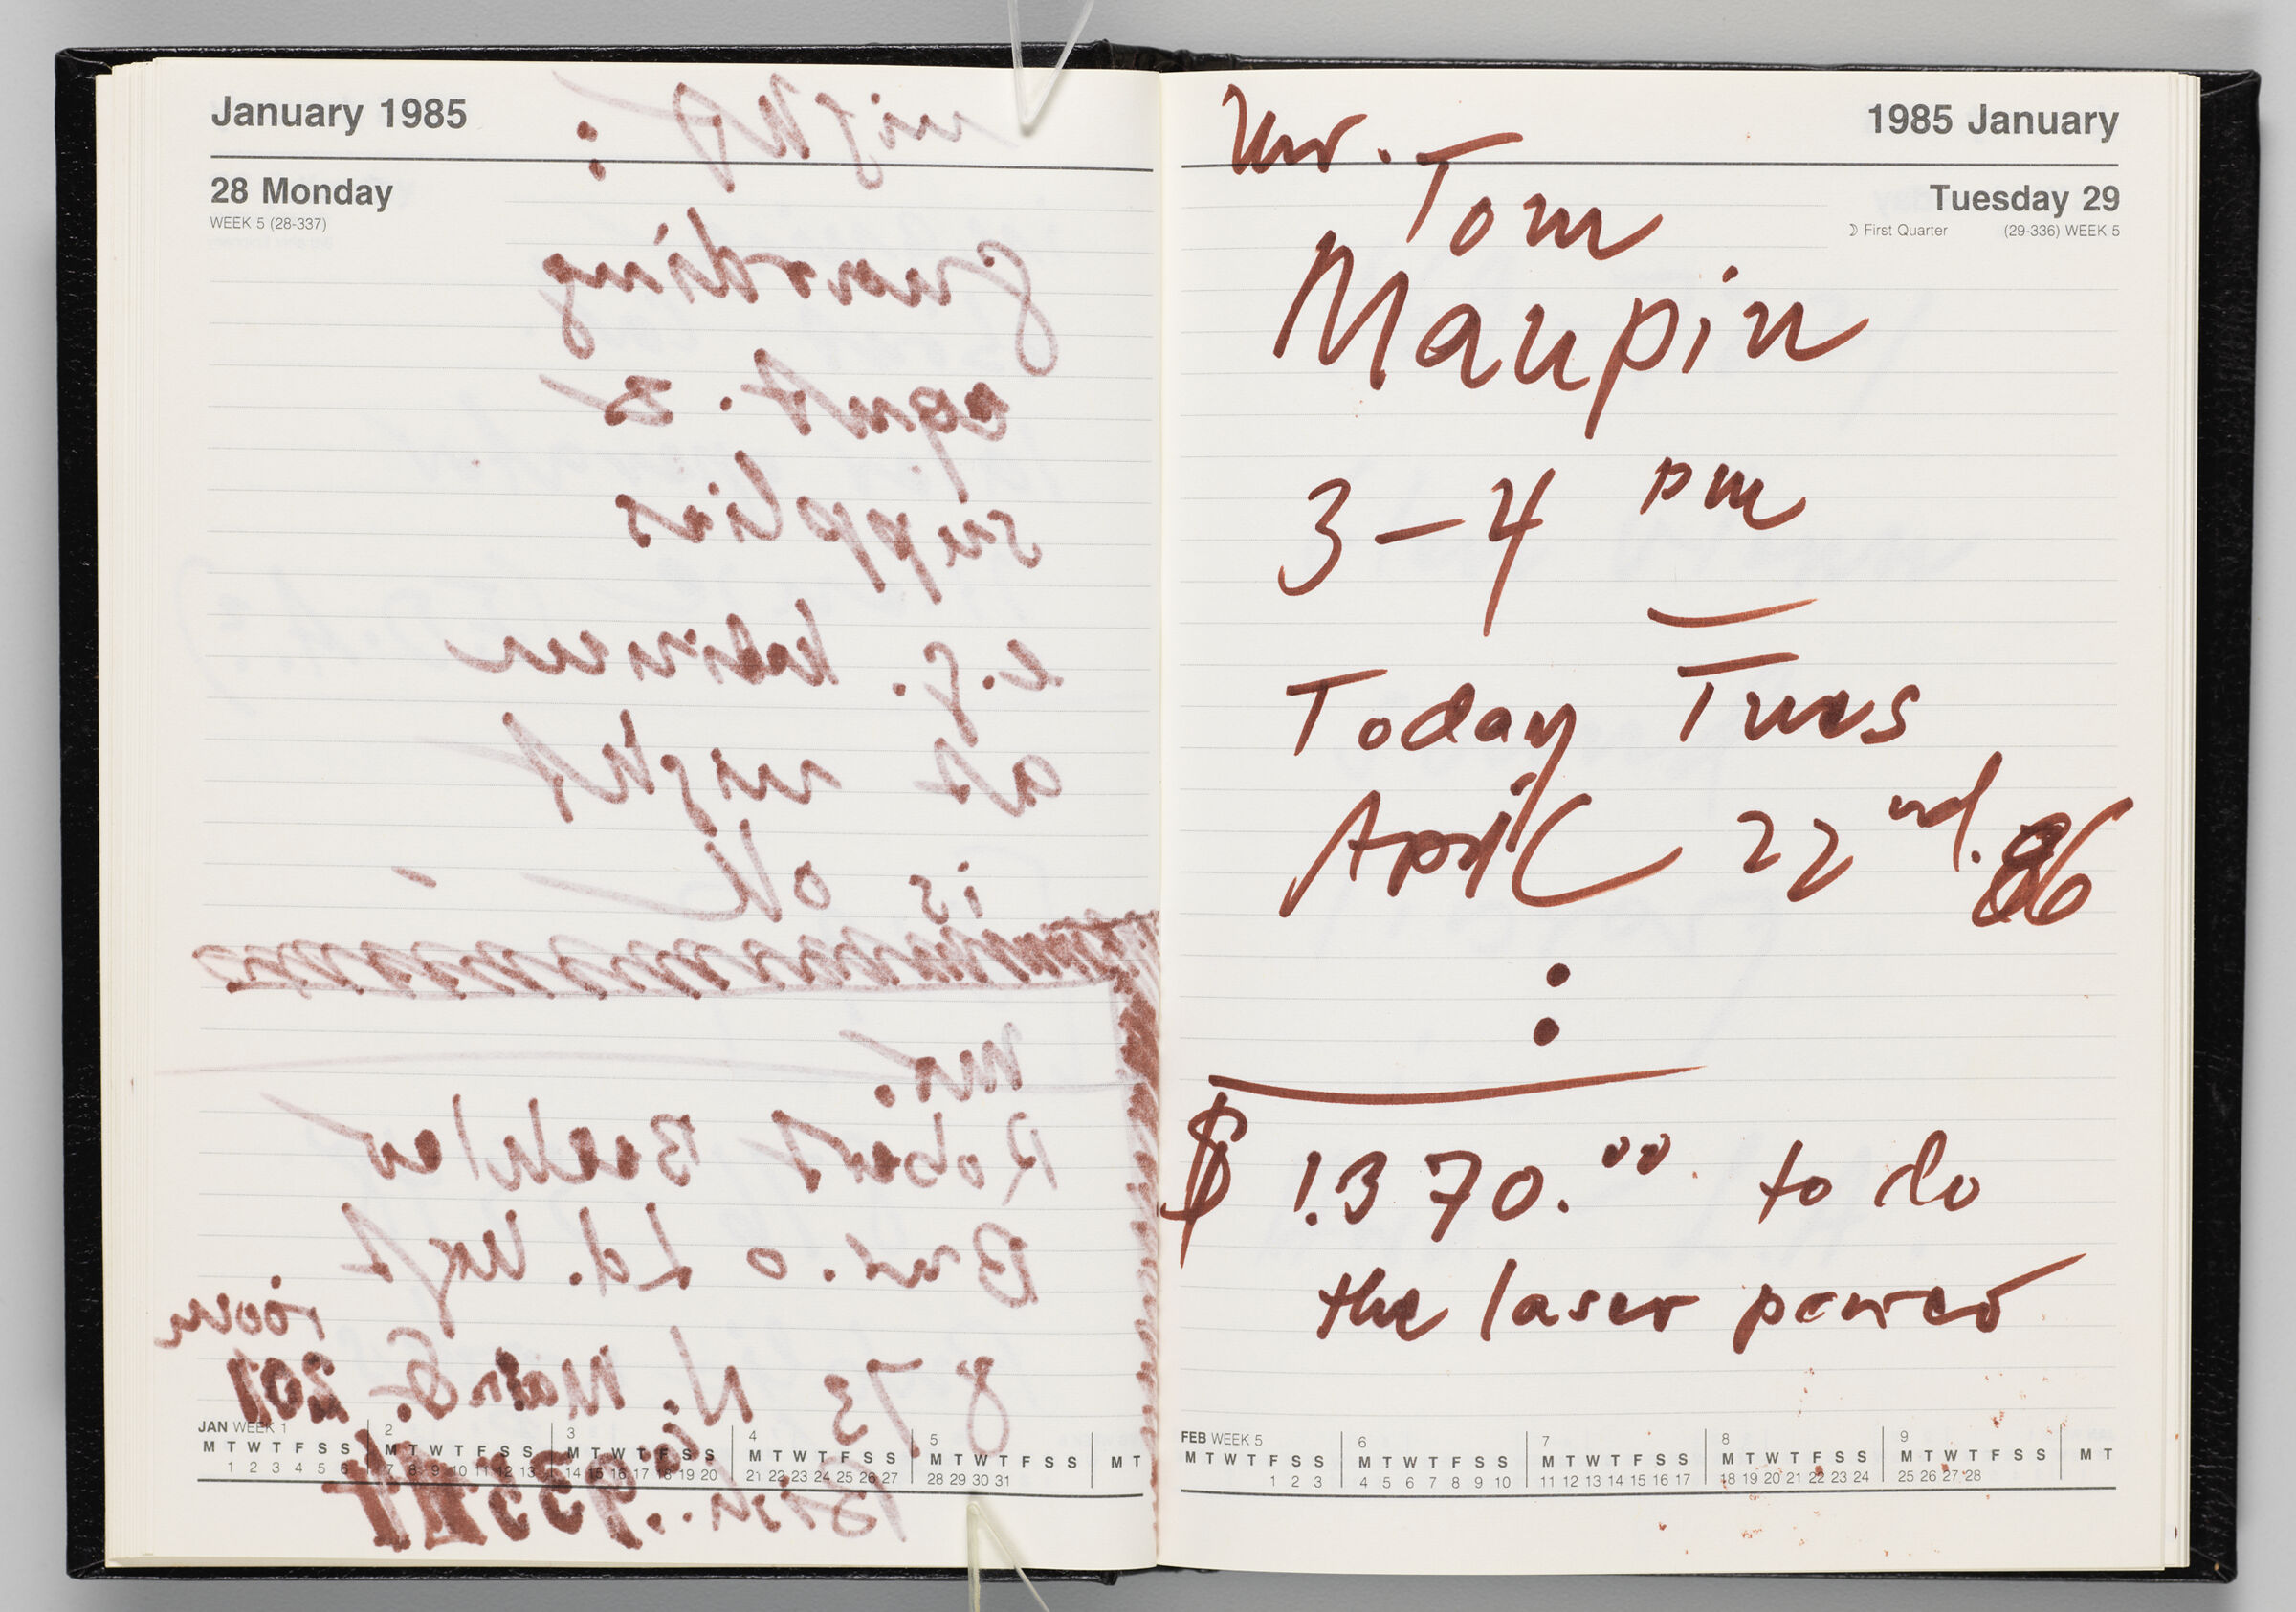 Untitled (Bleed-Through Of Previous Page, Left Page); Untitled (Notes On Calendar Page January 29, 1985, Right Page)